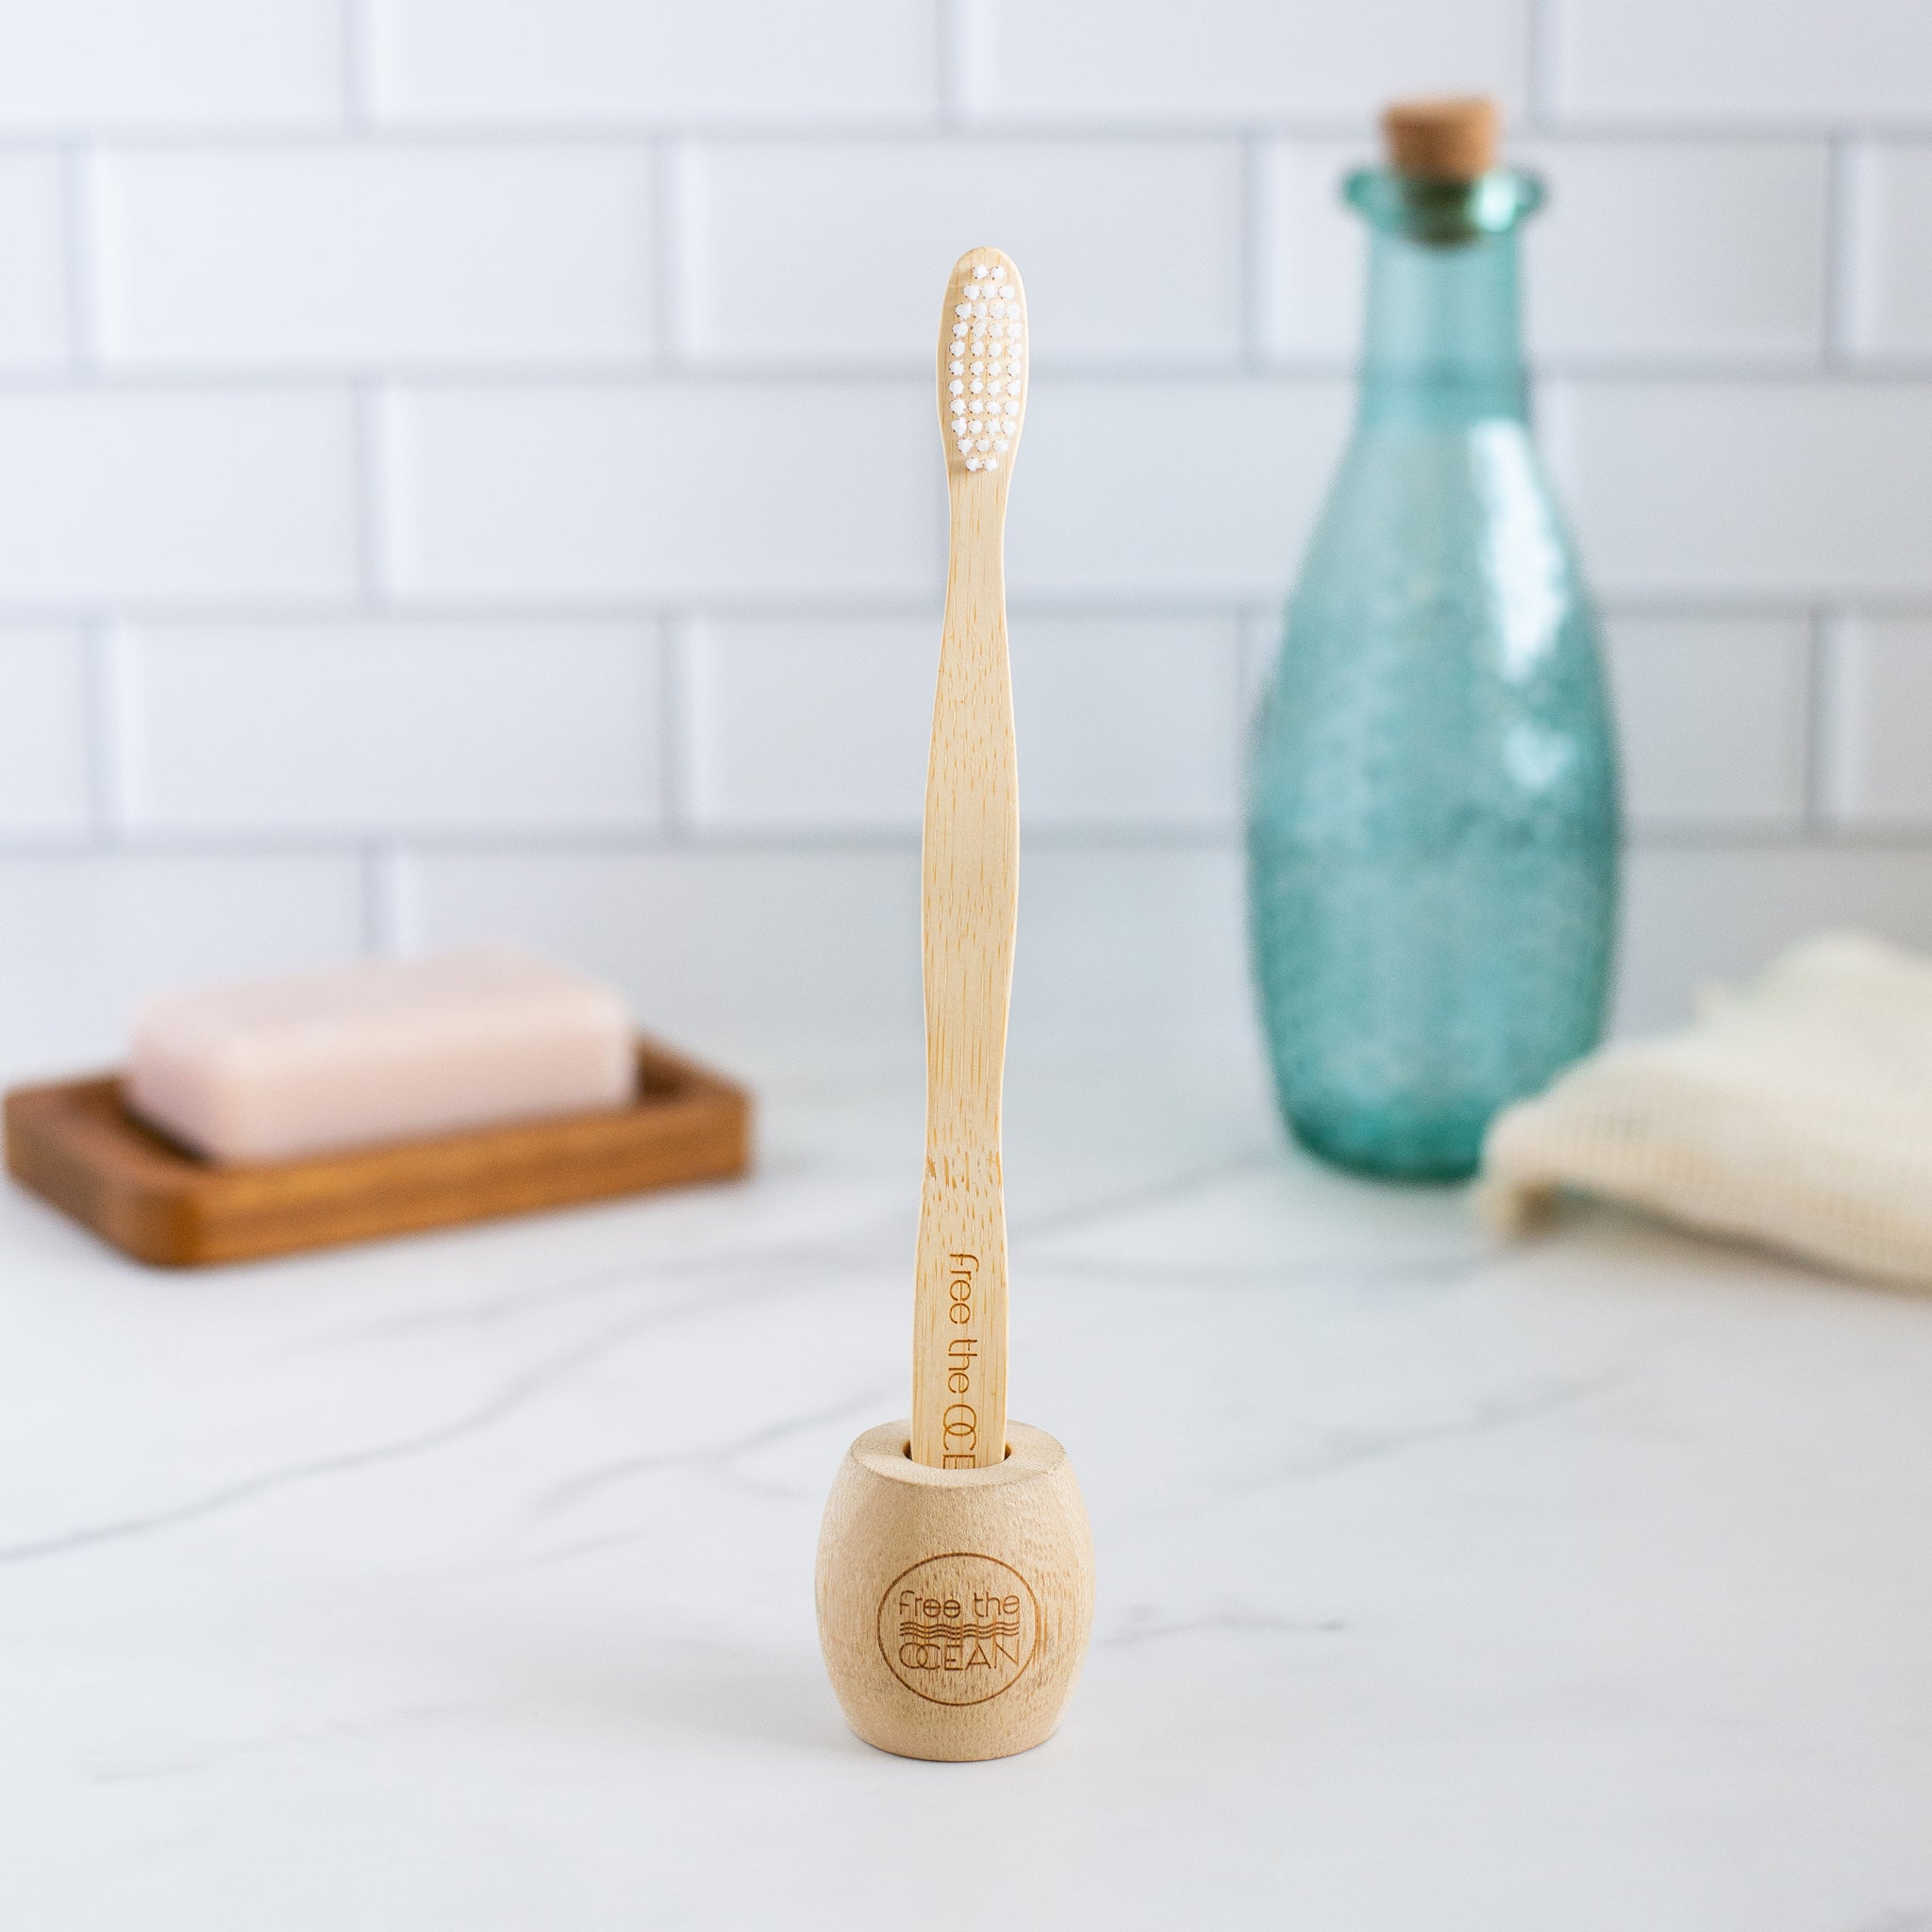 https://cdn.shopify.com/s/files/1/0127/9207/0208/products/fto-custom-toothbrush-and-stand-lifestyle-2.jpg?v=1679942501